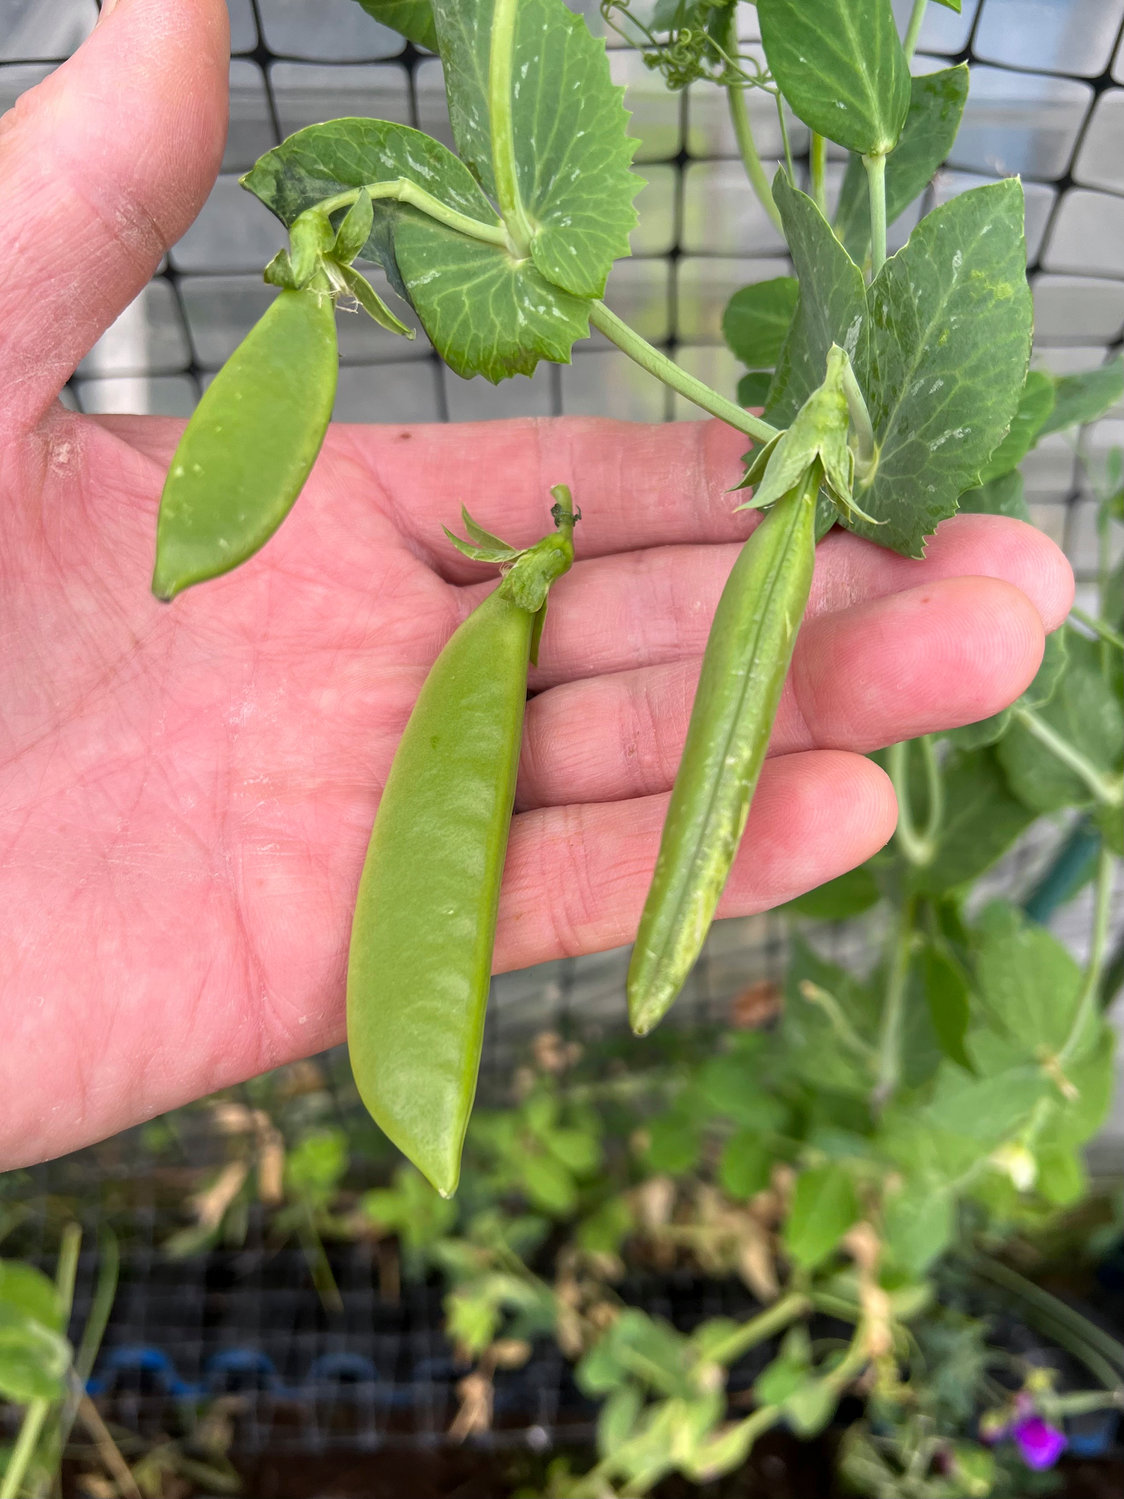 A snap pea pod with maturing peas that may prevent new flowers.